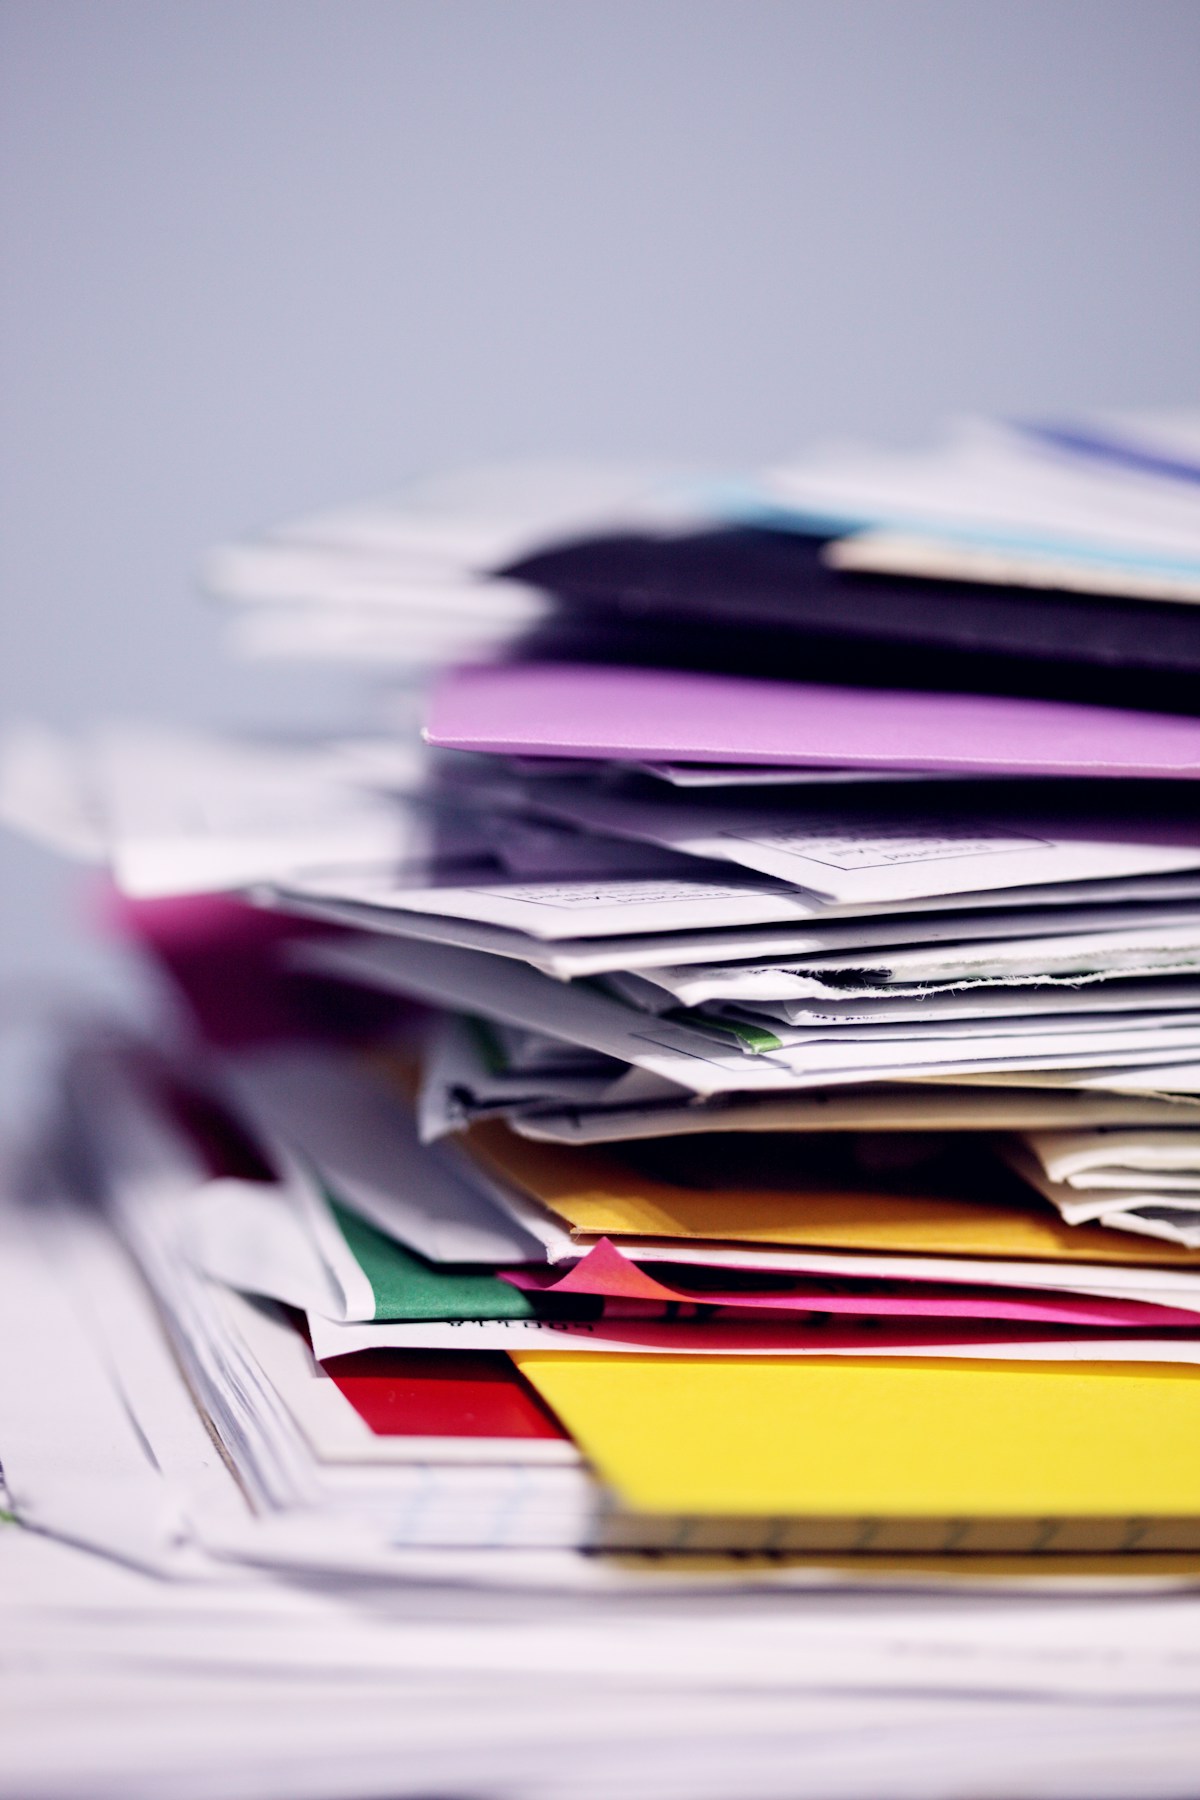 #2 Tips To Increase Productivity- Organizing Digital Files And Documents